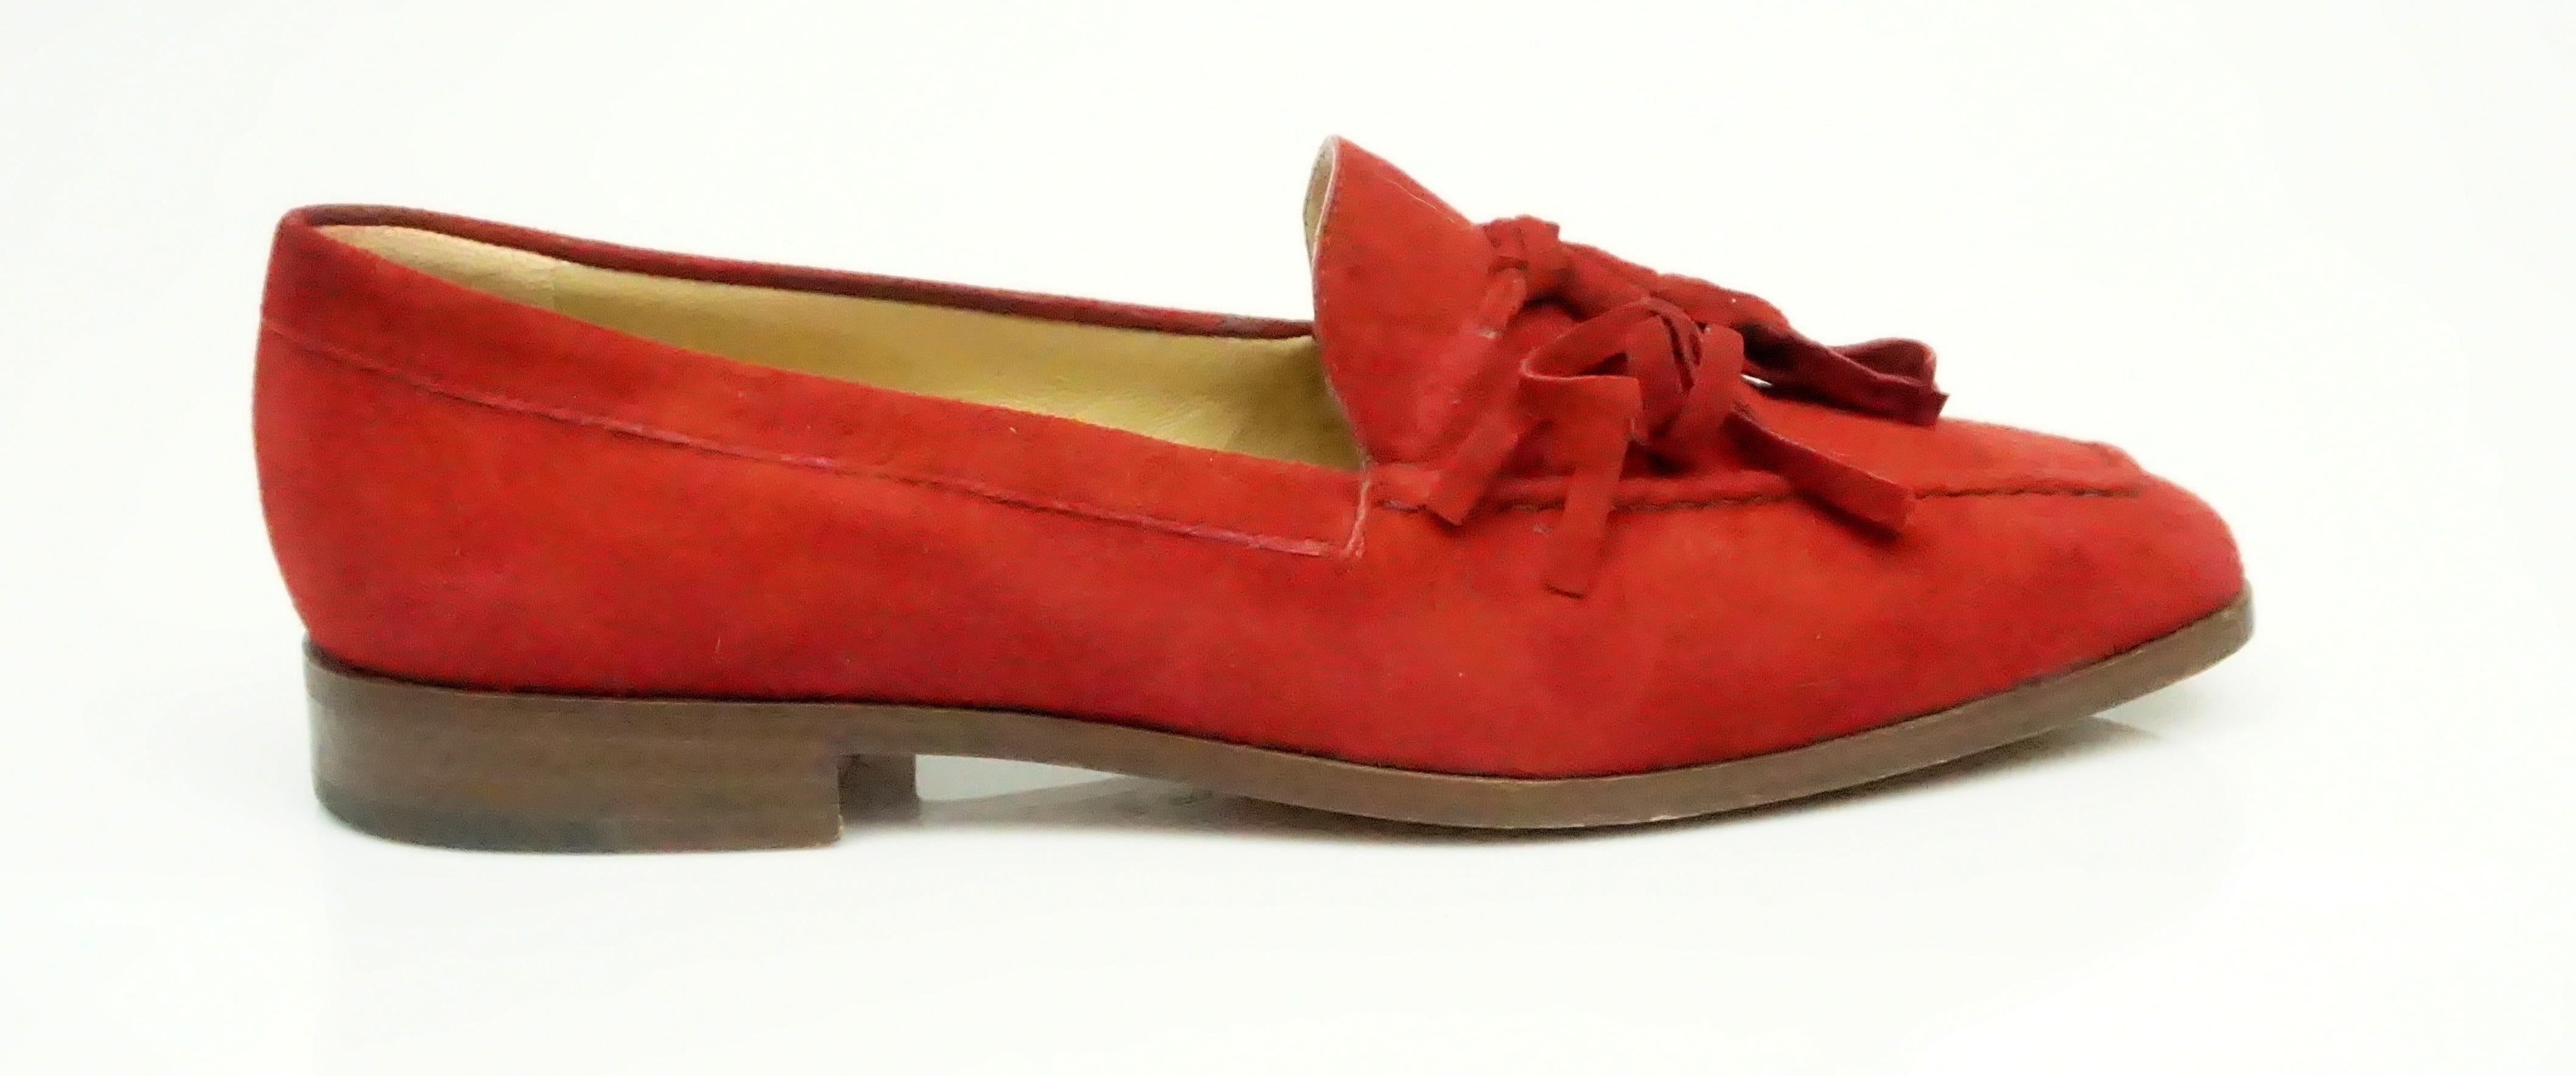 Gucci Vintage Red Suede Tassel Loafer - 6.  This gorgeous suede loafer is in excellent condition. The entire shoe is covered in suede and has a suede tassel detail in the front. There is some wear on the bottom of the shoe but the rest of the shoe